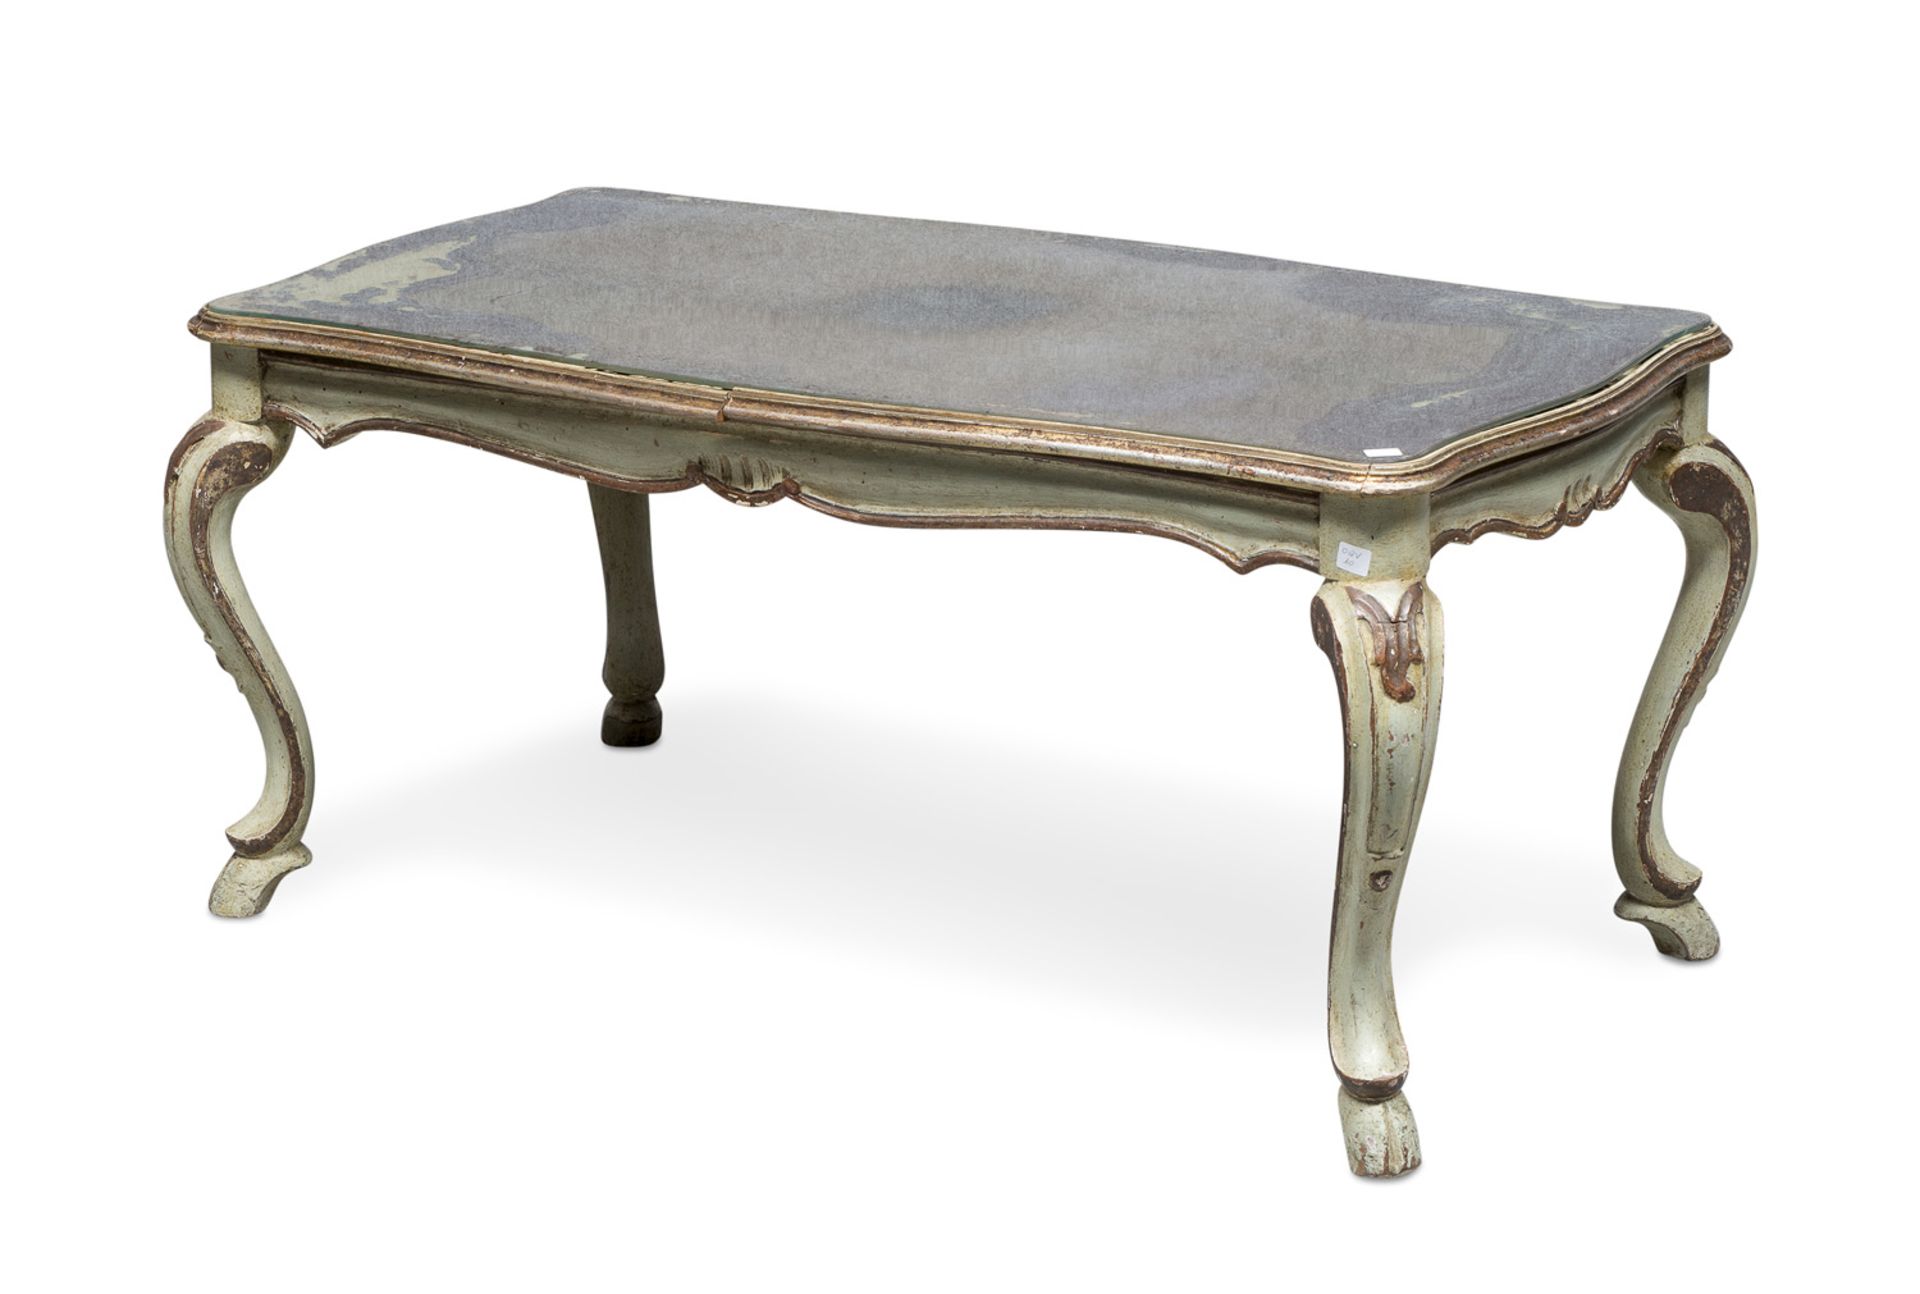 LACQUERED WOOD COFFEE TABLE 18th CENTURY ELEMENTS